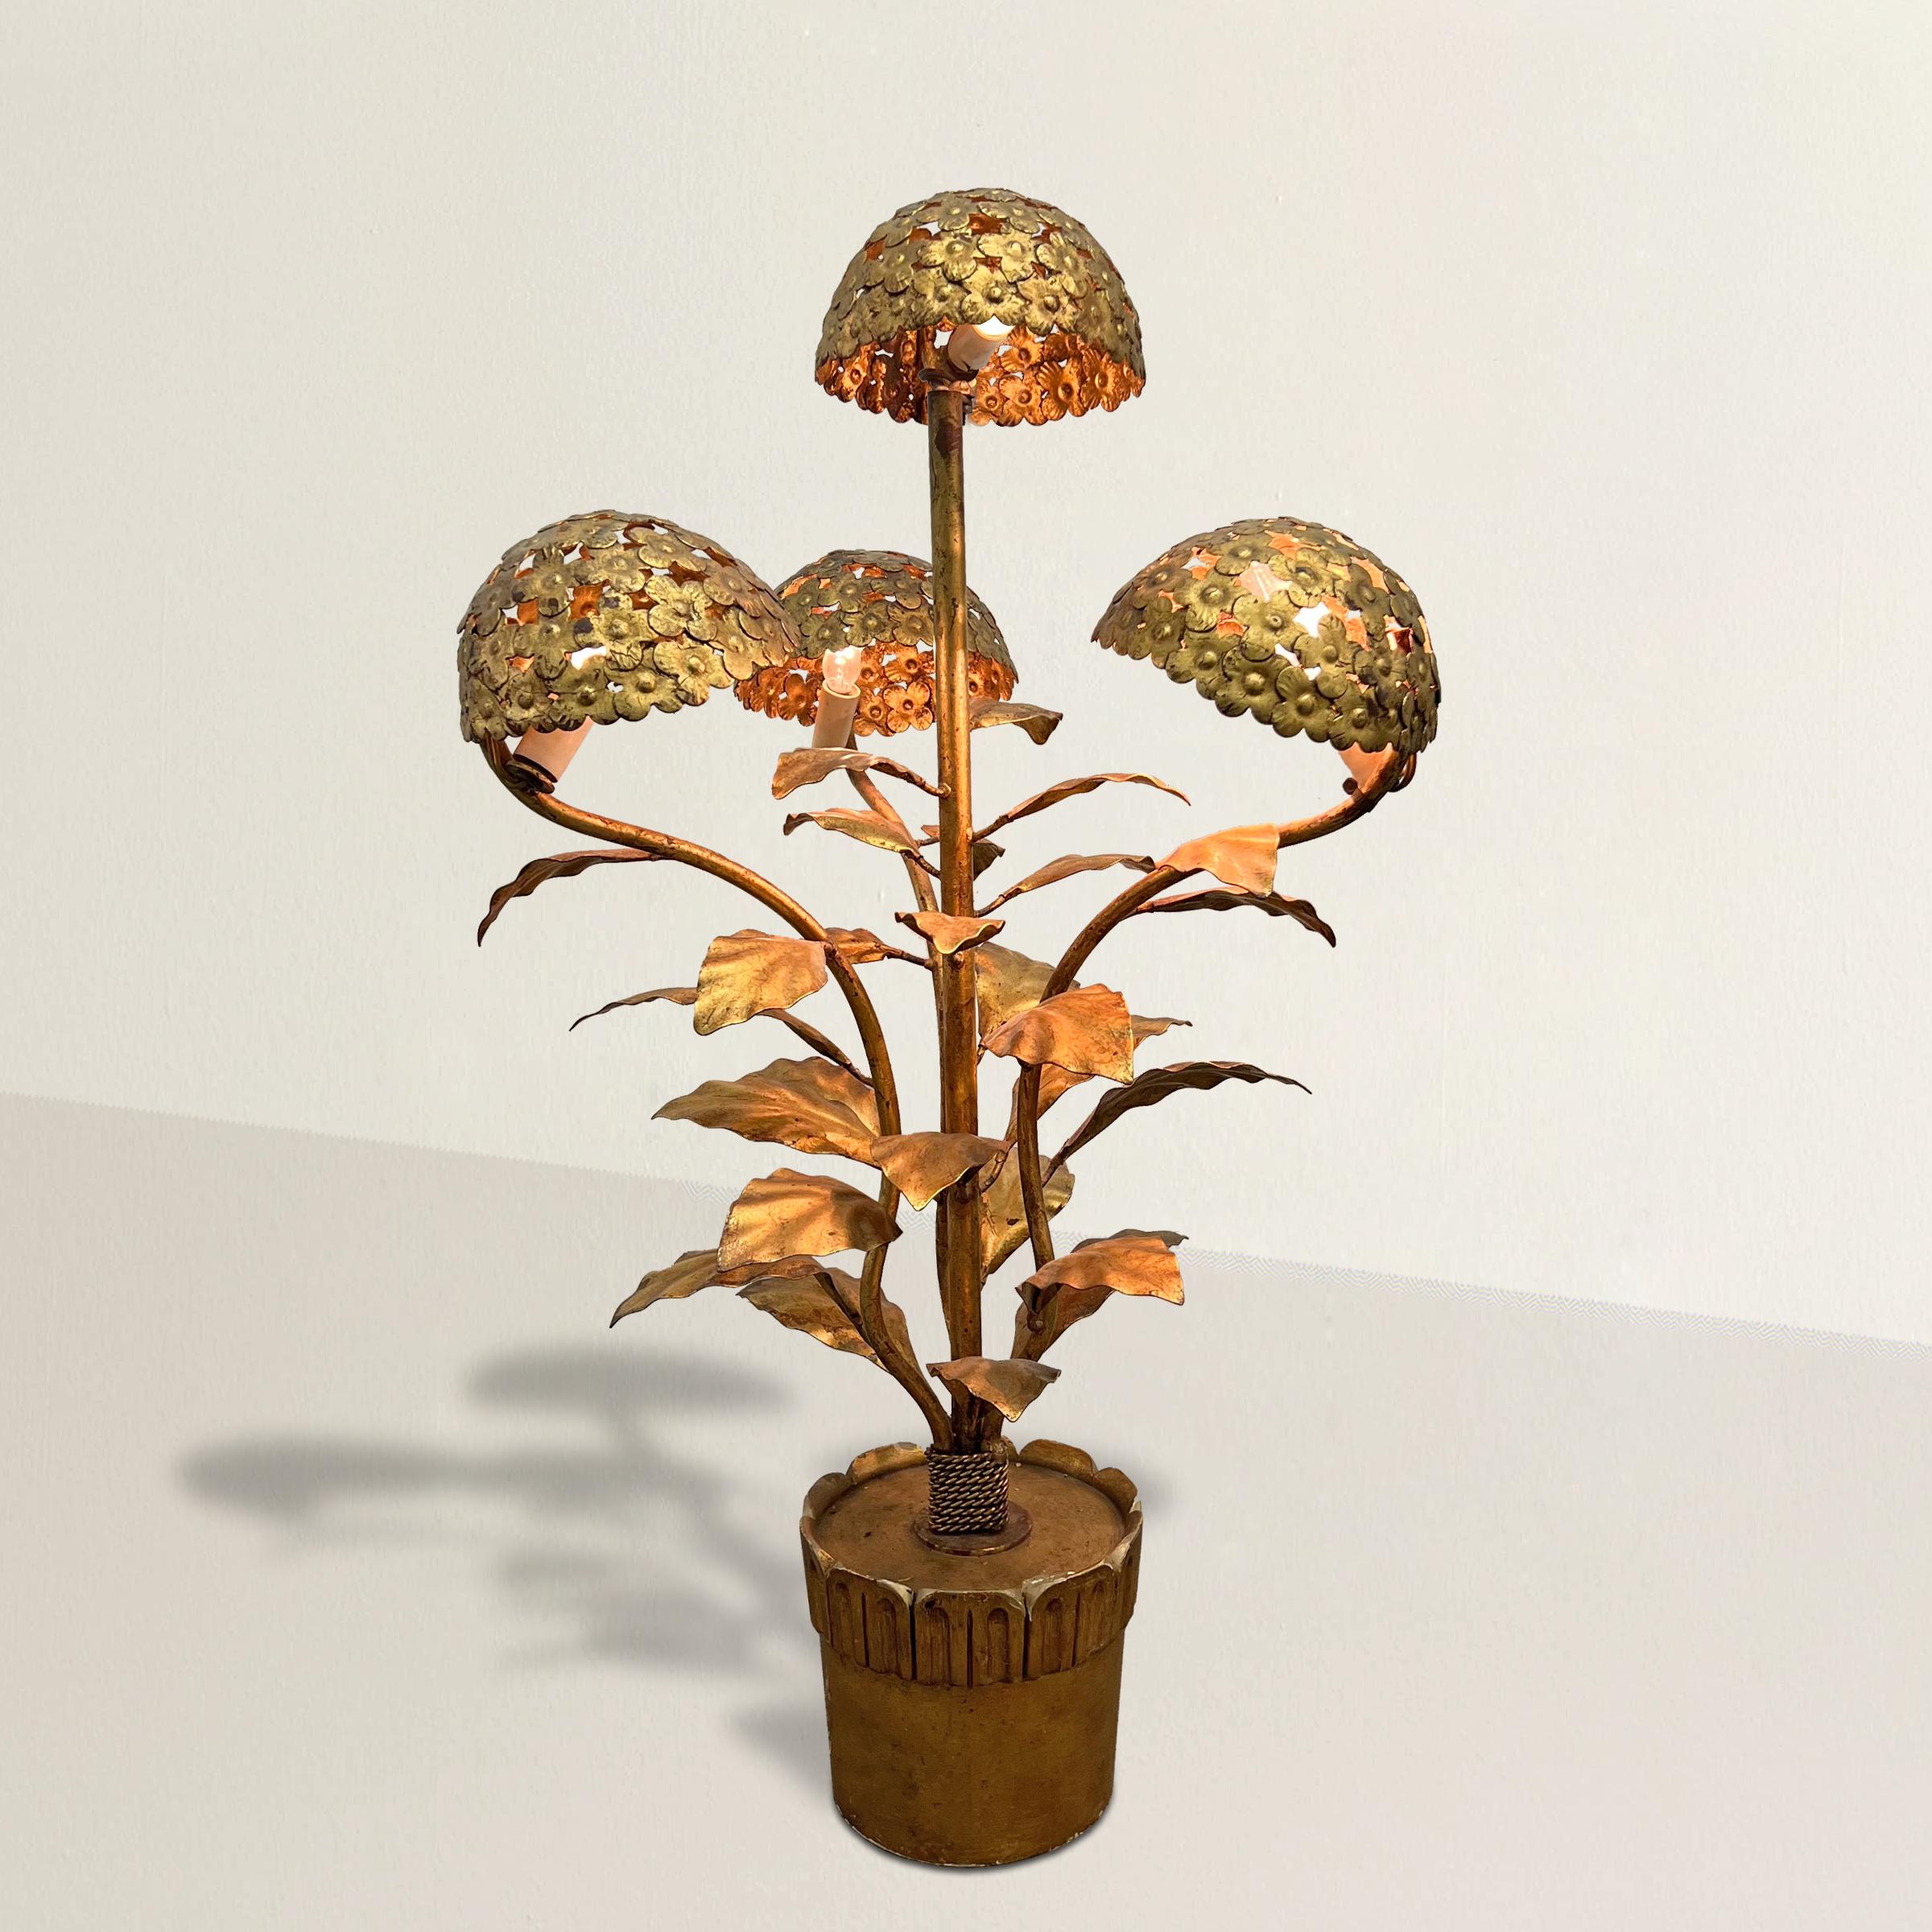 A whimsical and playful Italian mid-20th century gilt steel table lamp in the form of a potted hydrangea plant with three arms surrounding a central stem, all with large mop-head hydrangea blossoms that light from below, and with myriad leaves